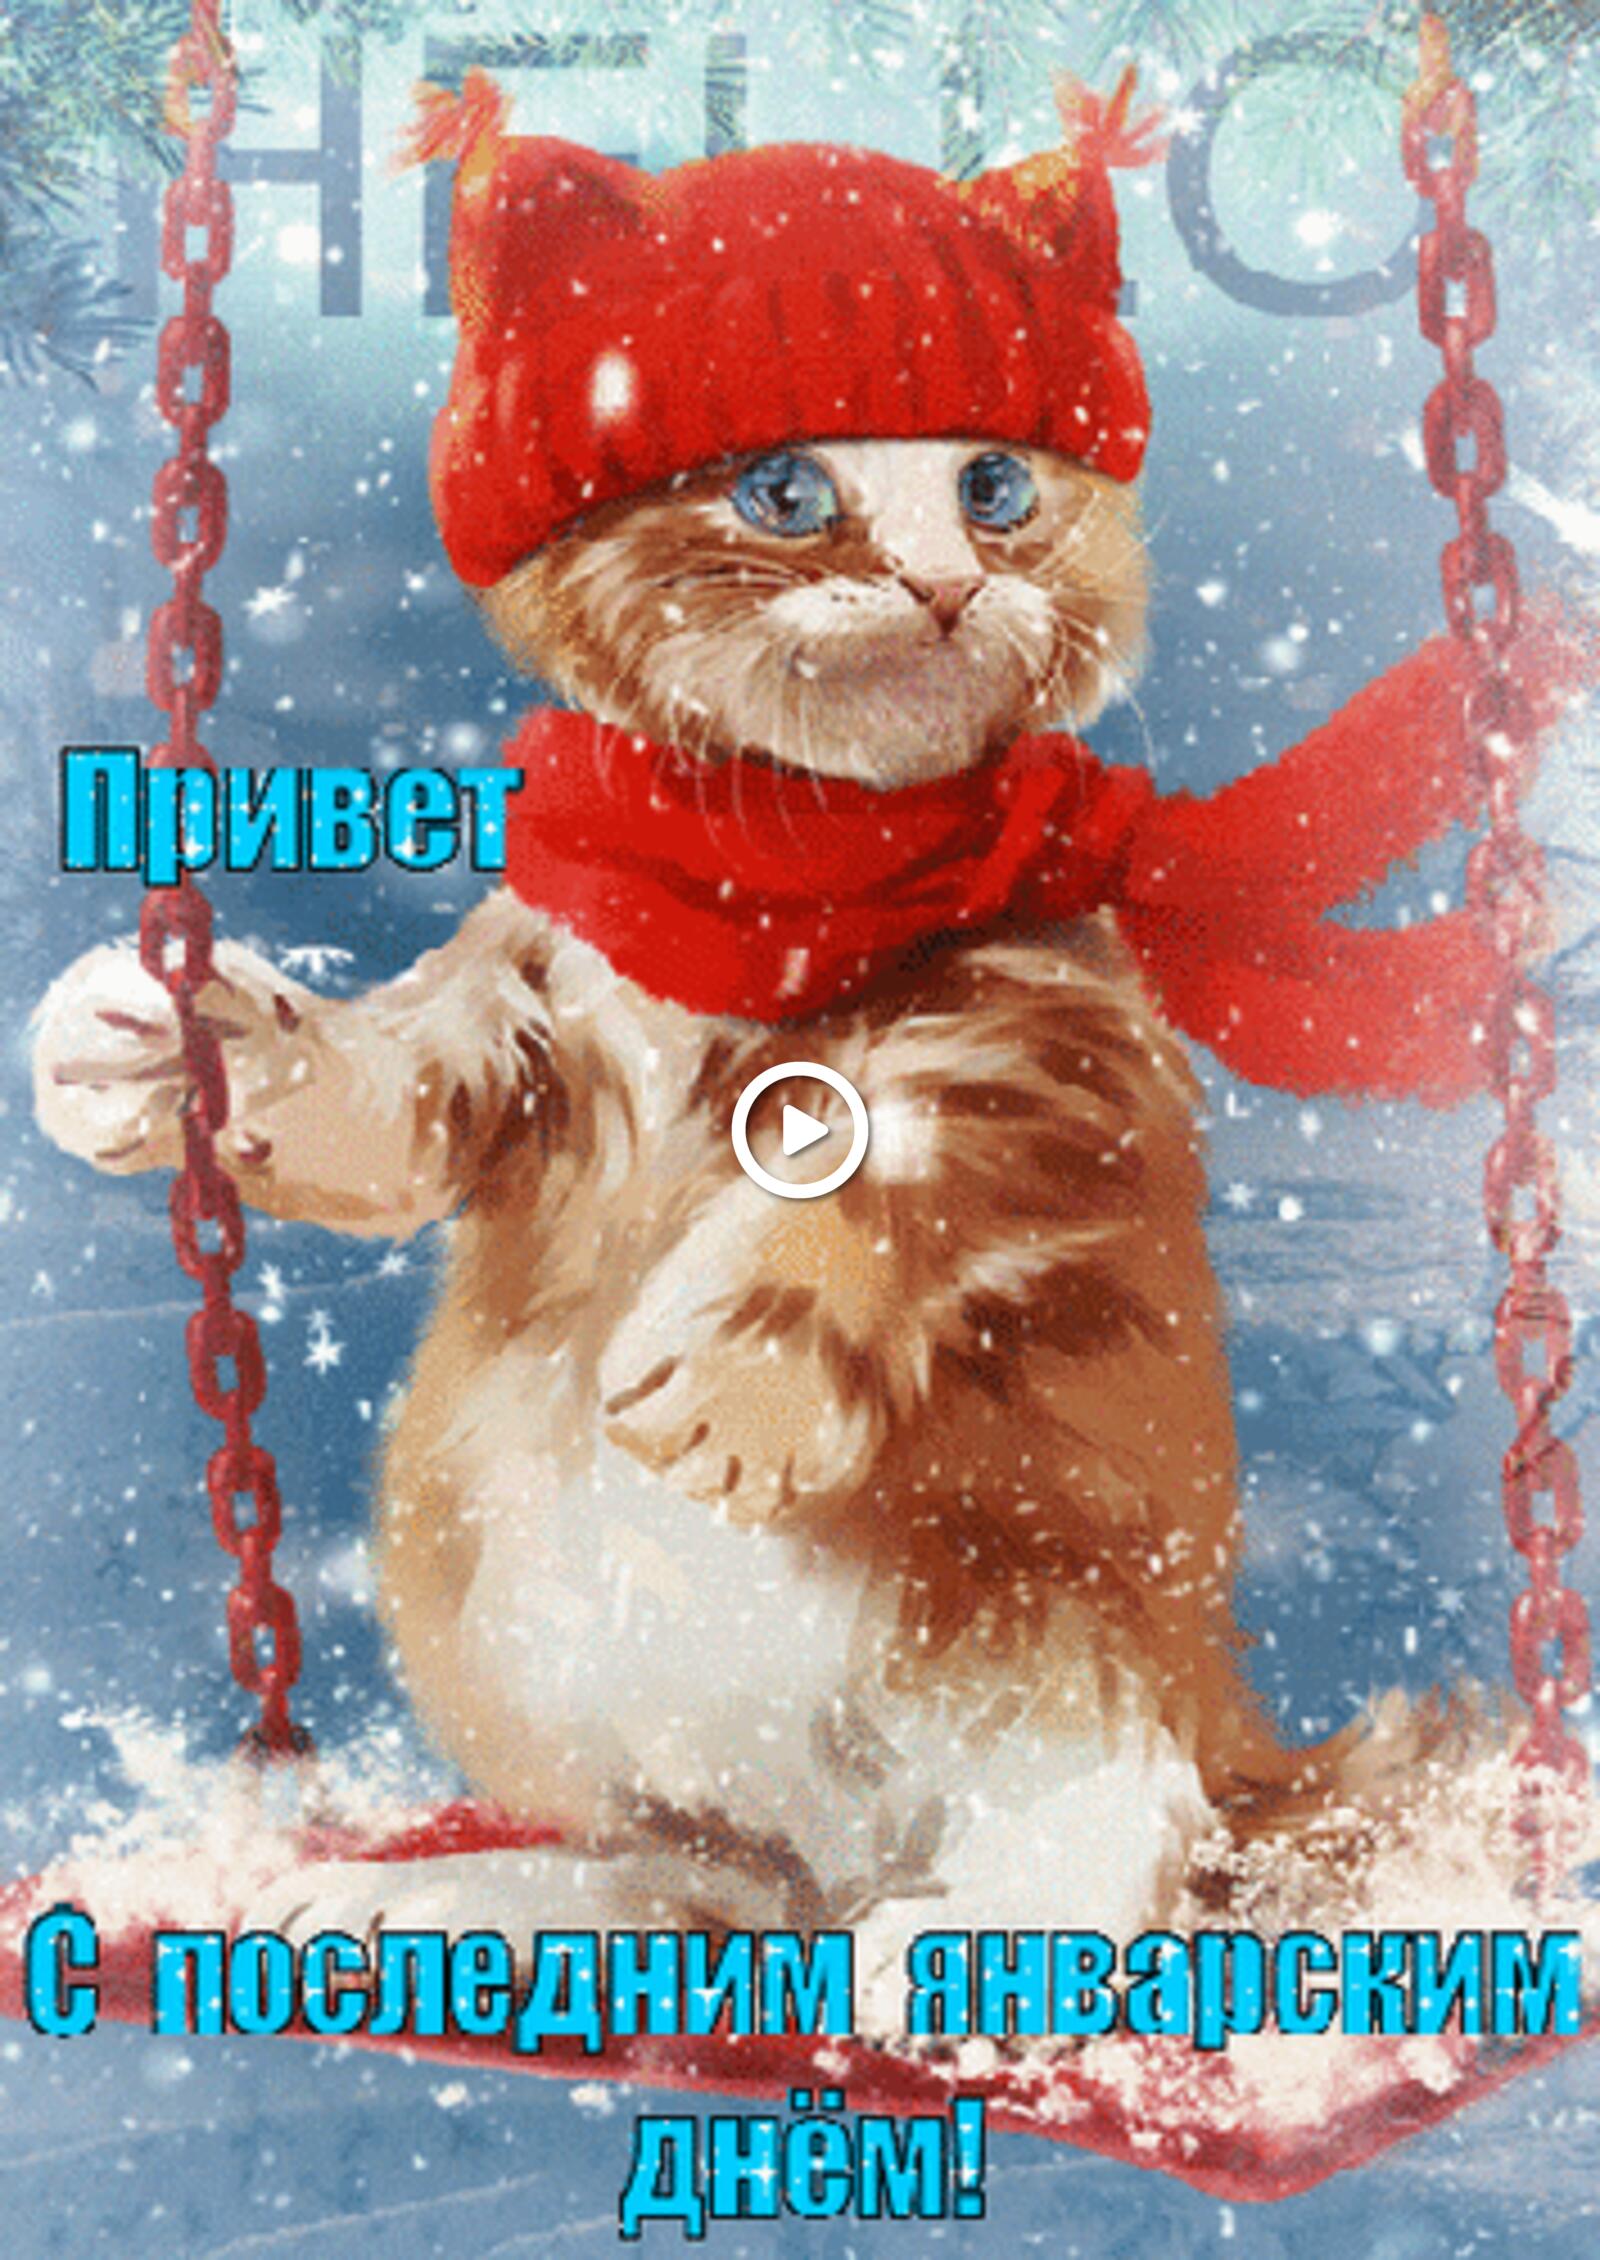 A postcard on the subject of last day of january happy new year card kitten for free